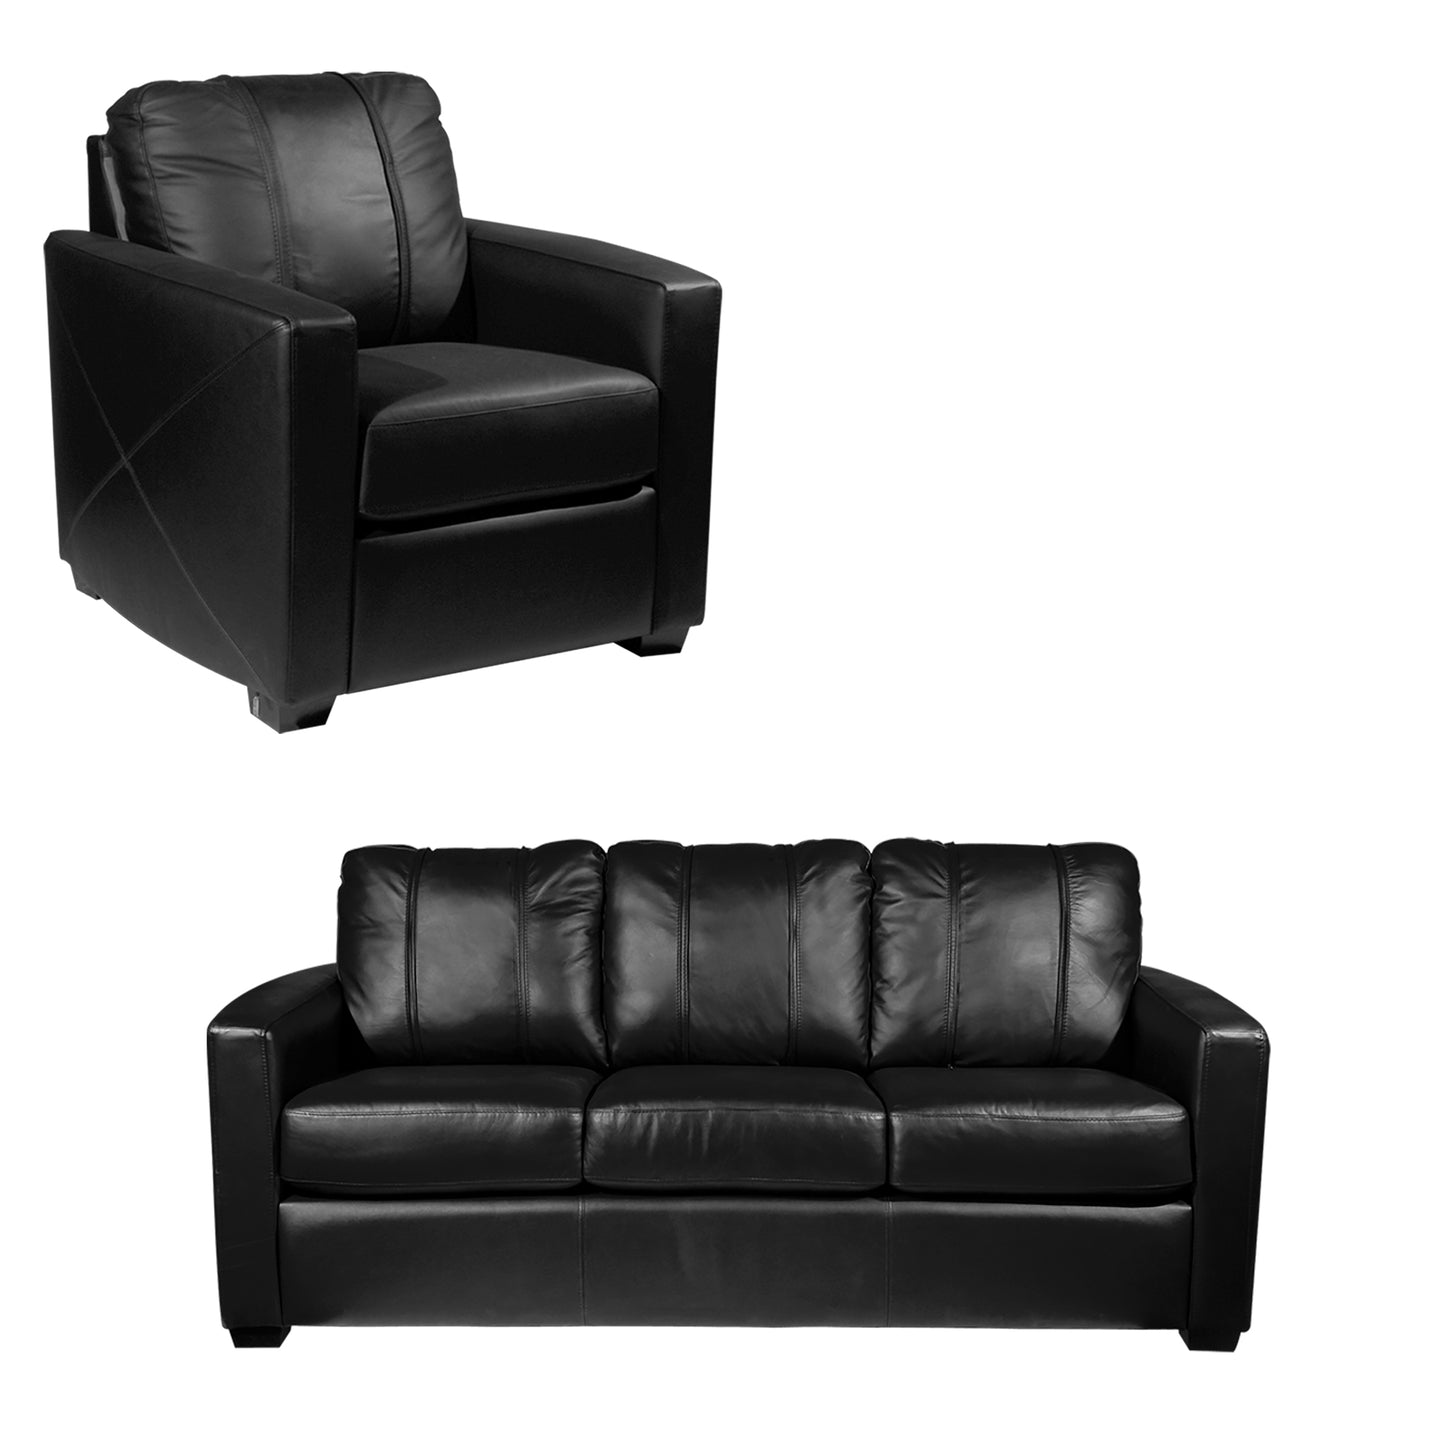 Stationary Seating Collection Commercial Grade Black Upholstery Without Logo